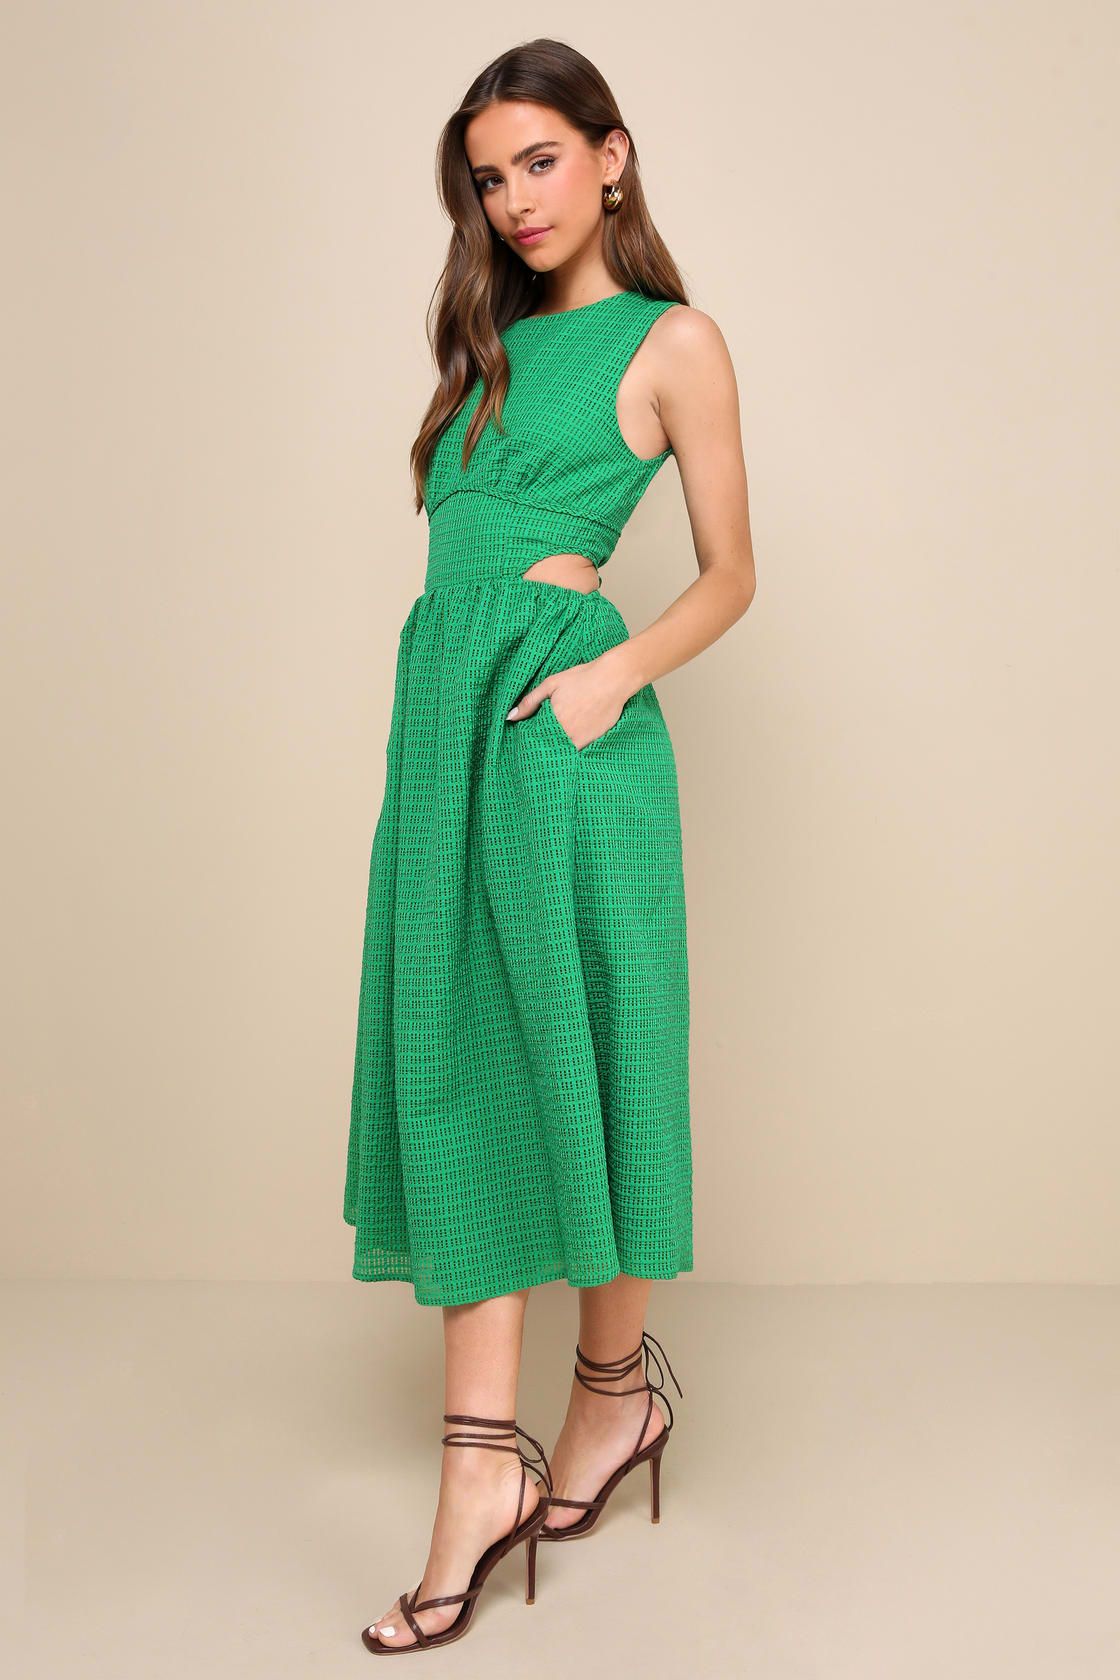 Charm and Confidence Green Cutout Midi Dress With Pockets | Lulus